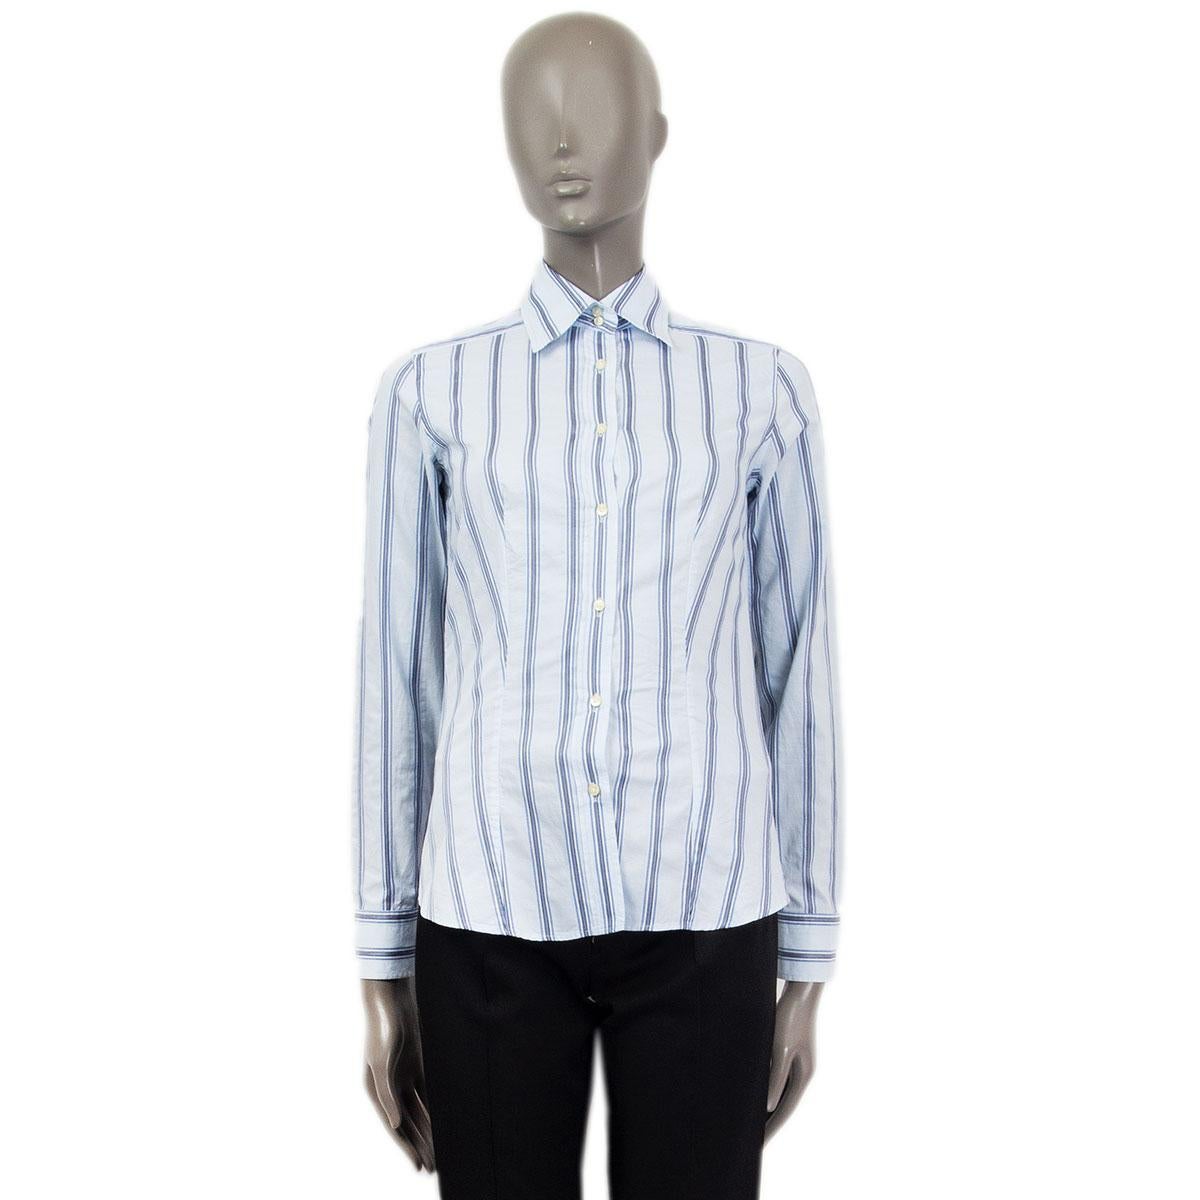 100% authentic Etro striped button-down shirt in light blue, black and white cotton (100%) with buttoned sleeve-cuffs. Closes with two buttons at the neck and eight buttons at the front. Unlined. Has been worn and is in excellent